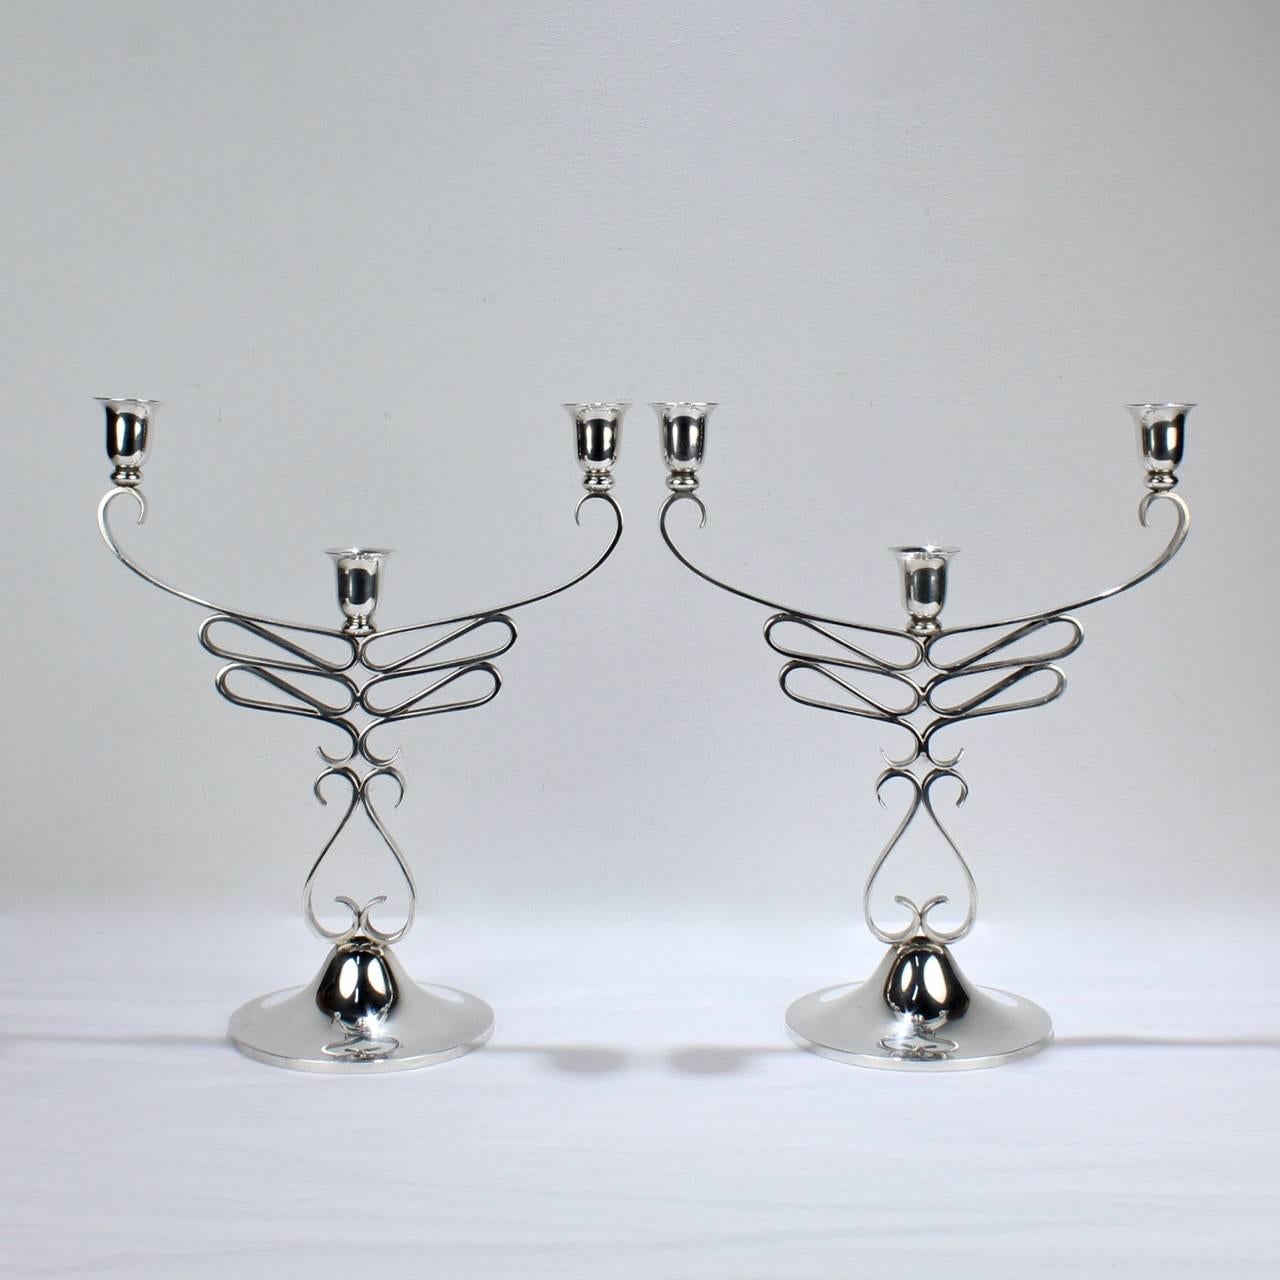 Mid-Century Modern Pair of Mid-Century American Craft Sterling Silver Candelabra by A. Sciarrotta